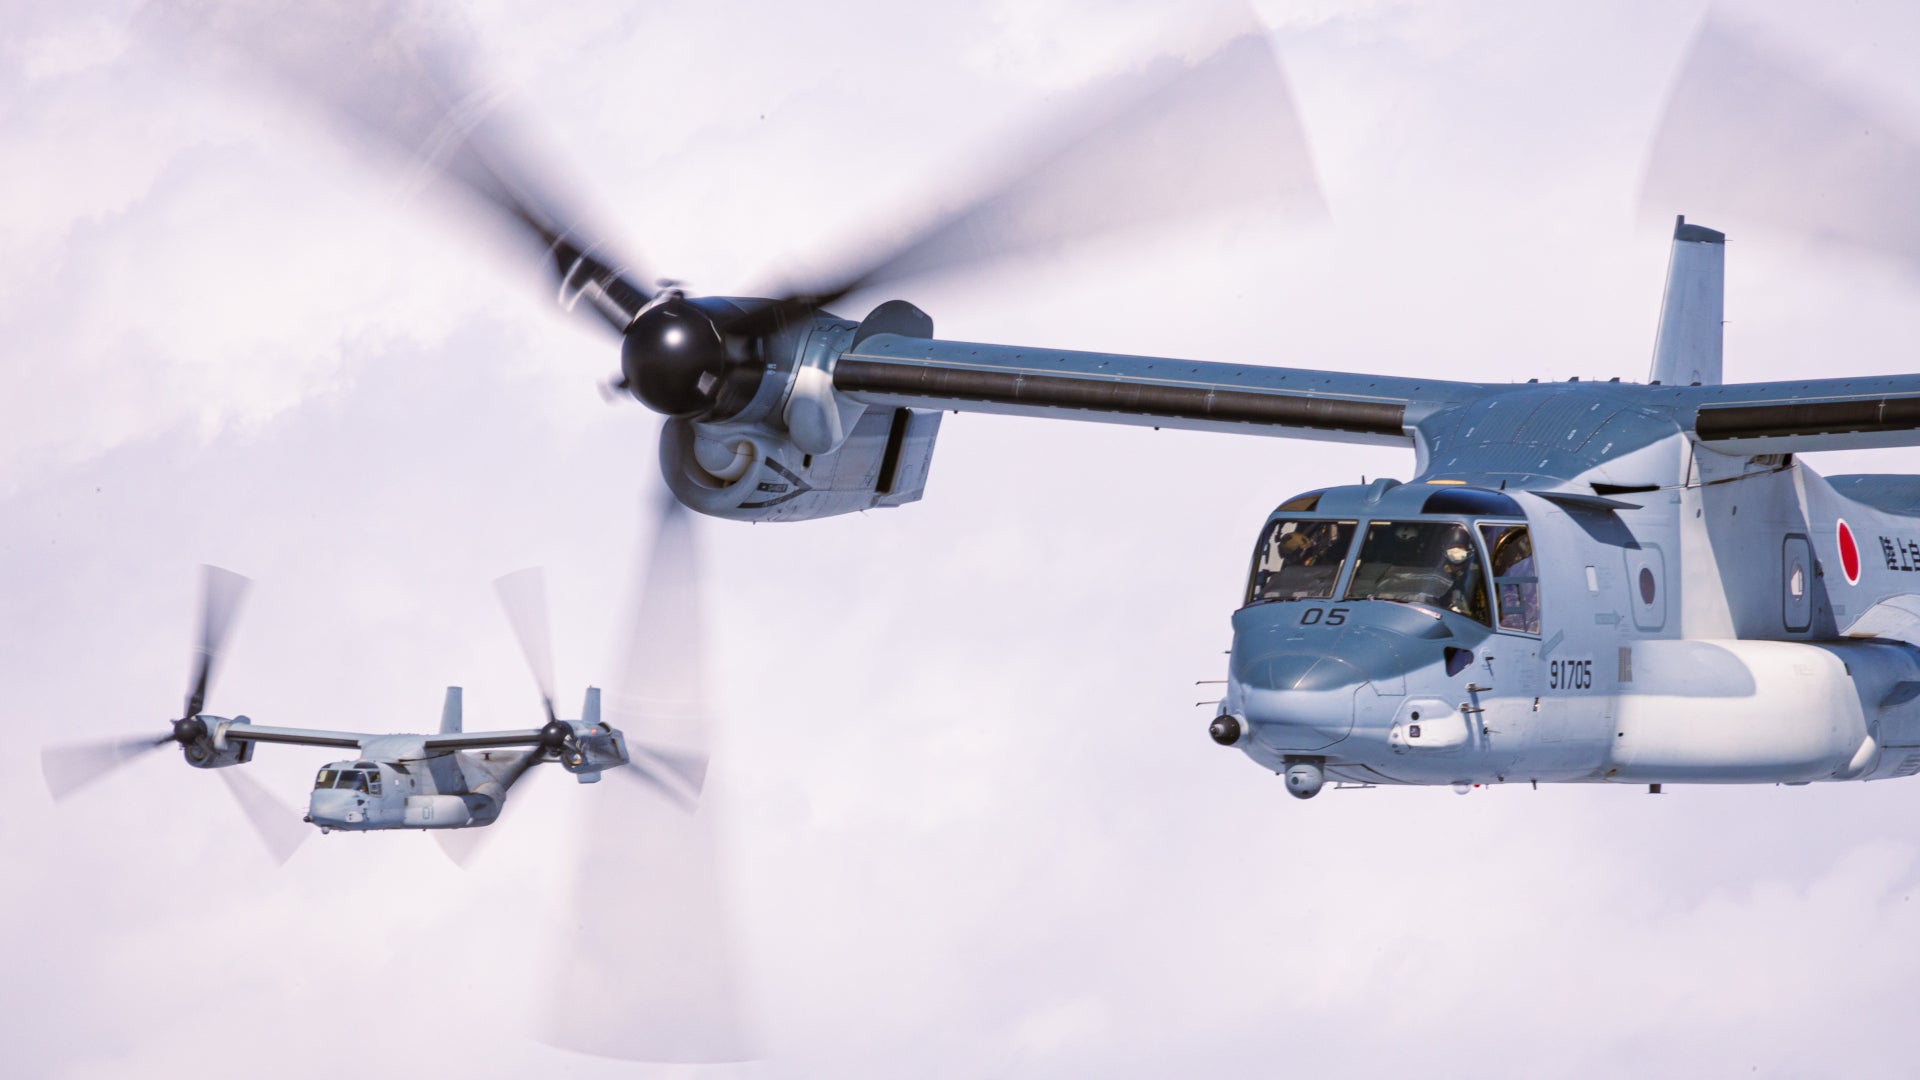 A U.S. Marine Corps MV-22B Osprey with Marine Medium Tiltrotor Squadron 265 (Reinforced), 31st Marine Expeditionary Unit, and a Japanese Ground Self-Defense Force V-22 Osprey with the 107th Aviation Unit conduct a bilateral formation flight over Mount Fuji, Japan, Mar. 17, 2022. Bilateral flights build familiarity and interoperability between U.S. and Japanese aviation units. Maritime Defense Exercise Amphibious Ready Deployment Brigade is a bilateral exercise meant to increase interoperability and strengthen ties between U.S. and Japanese forces for the defense of Japan. (U.S. Marine Corps photo by Lance Cpl. Cesar Ronaldo Alarcon)